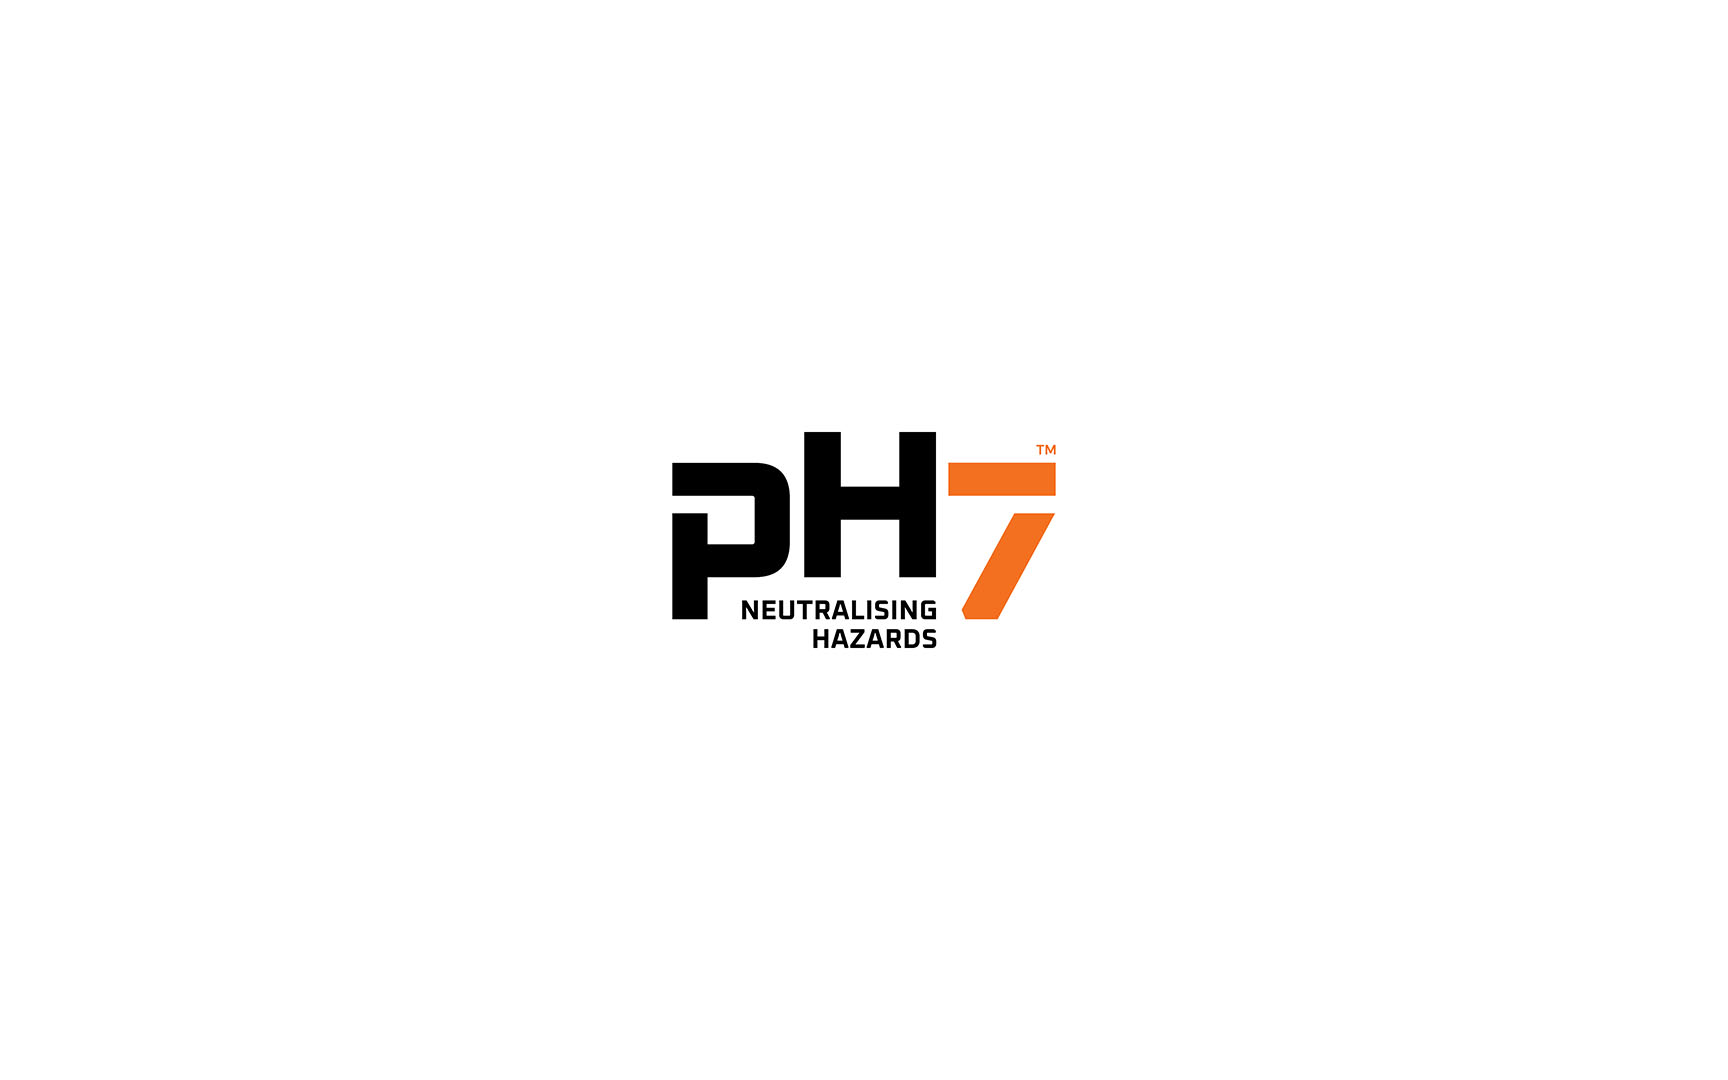 A brand that neutralises hazards. PH7, formerly Dalton International, wanted to evolve their brand to stand out in a cluttered market and be more engaging to consumers.